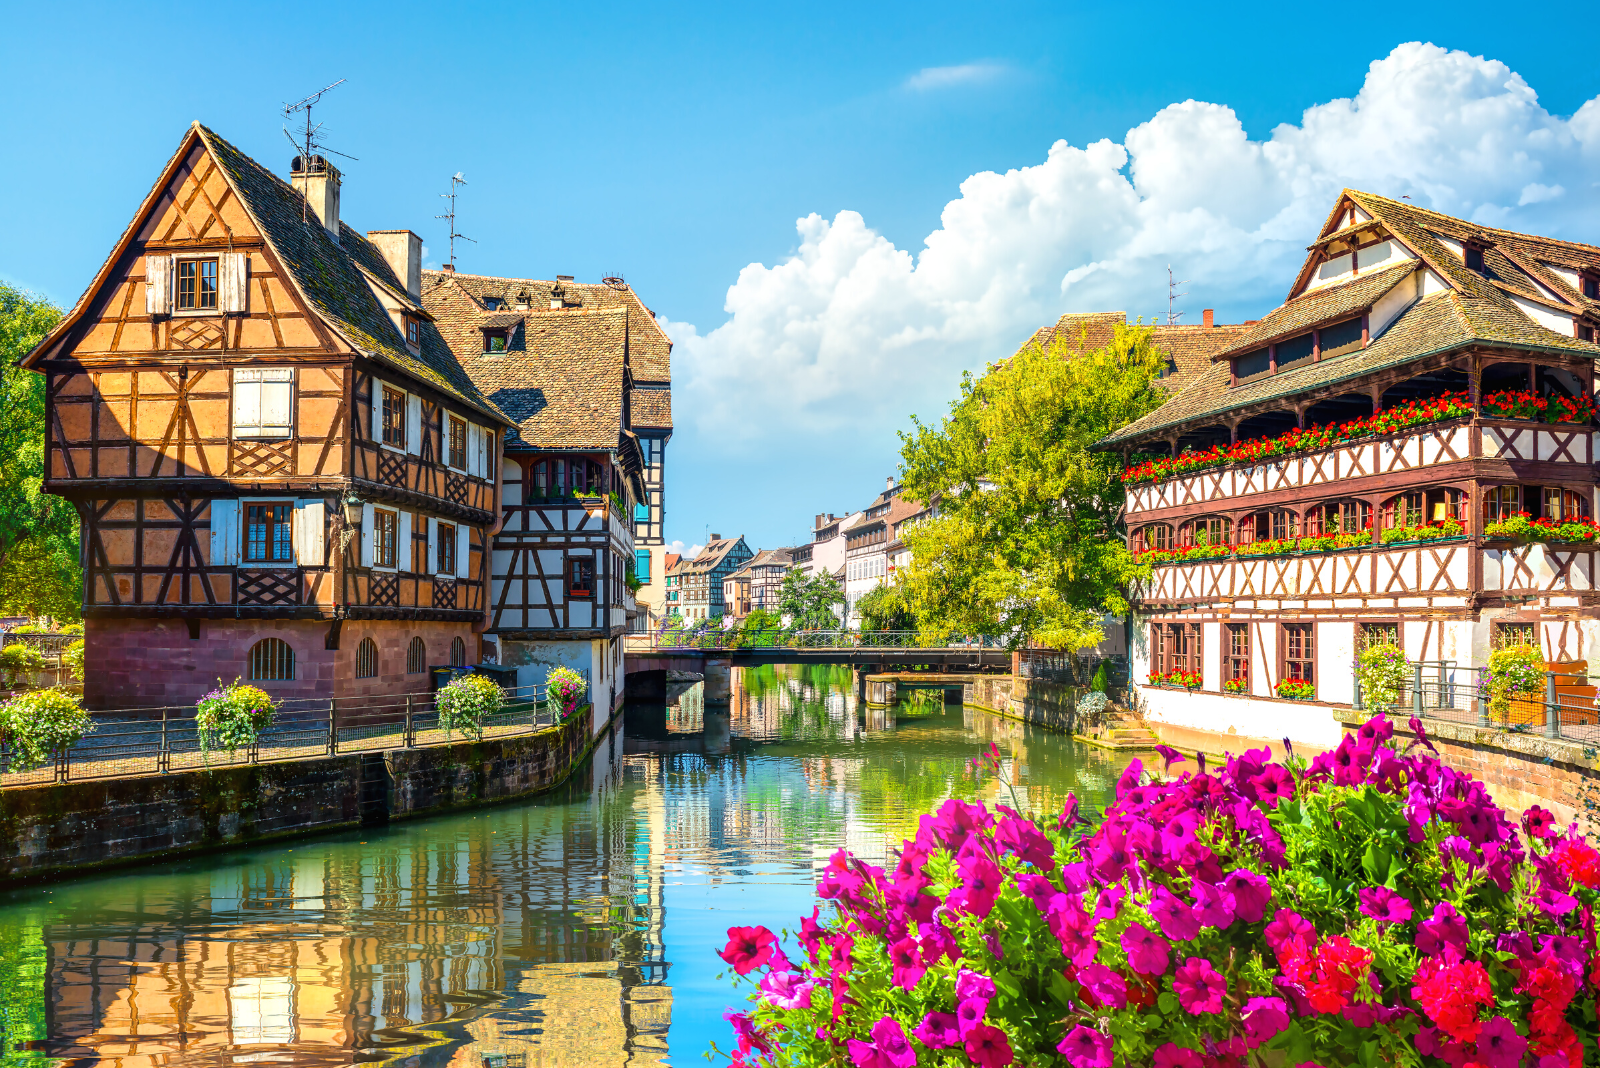 Houses by the canal in Strasbourg